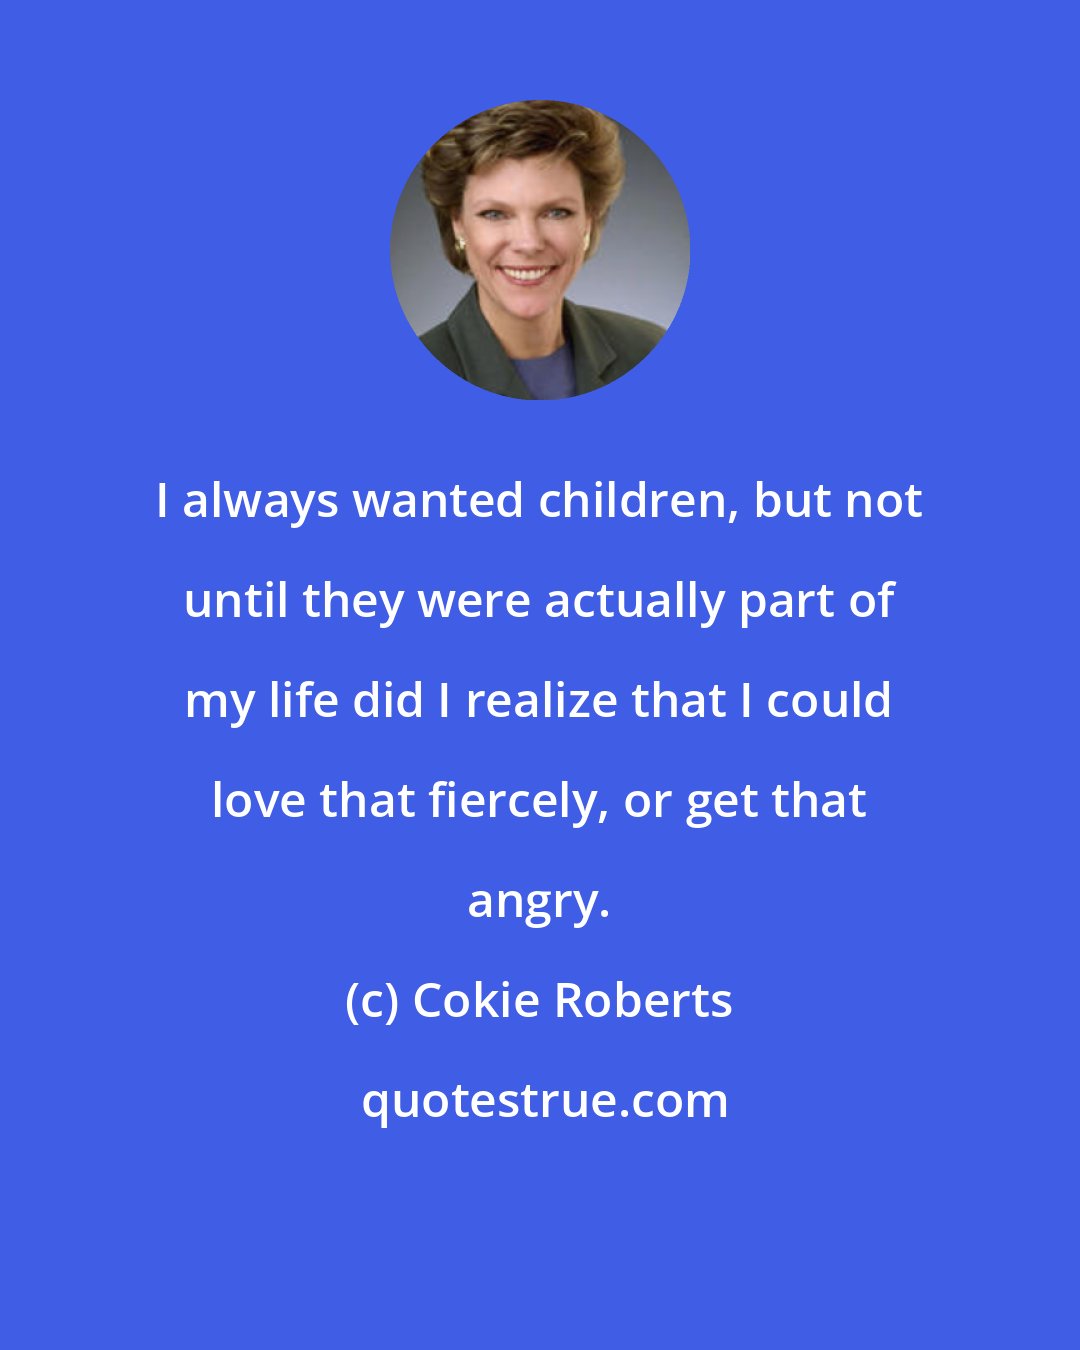 Cokie Roberts: I always wanted children, but not until they were actually part of my life did I realize that I could love that fiercely, or get that angry.